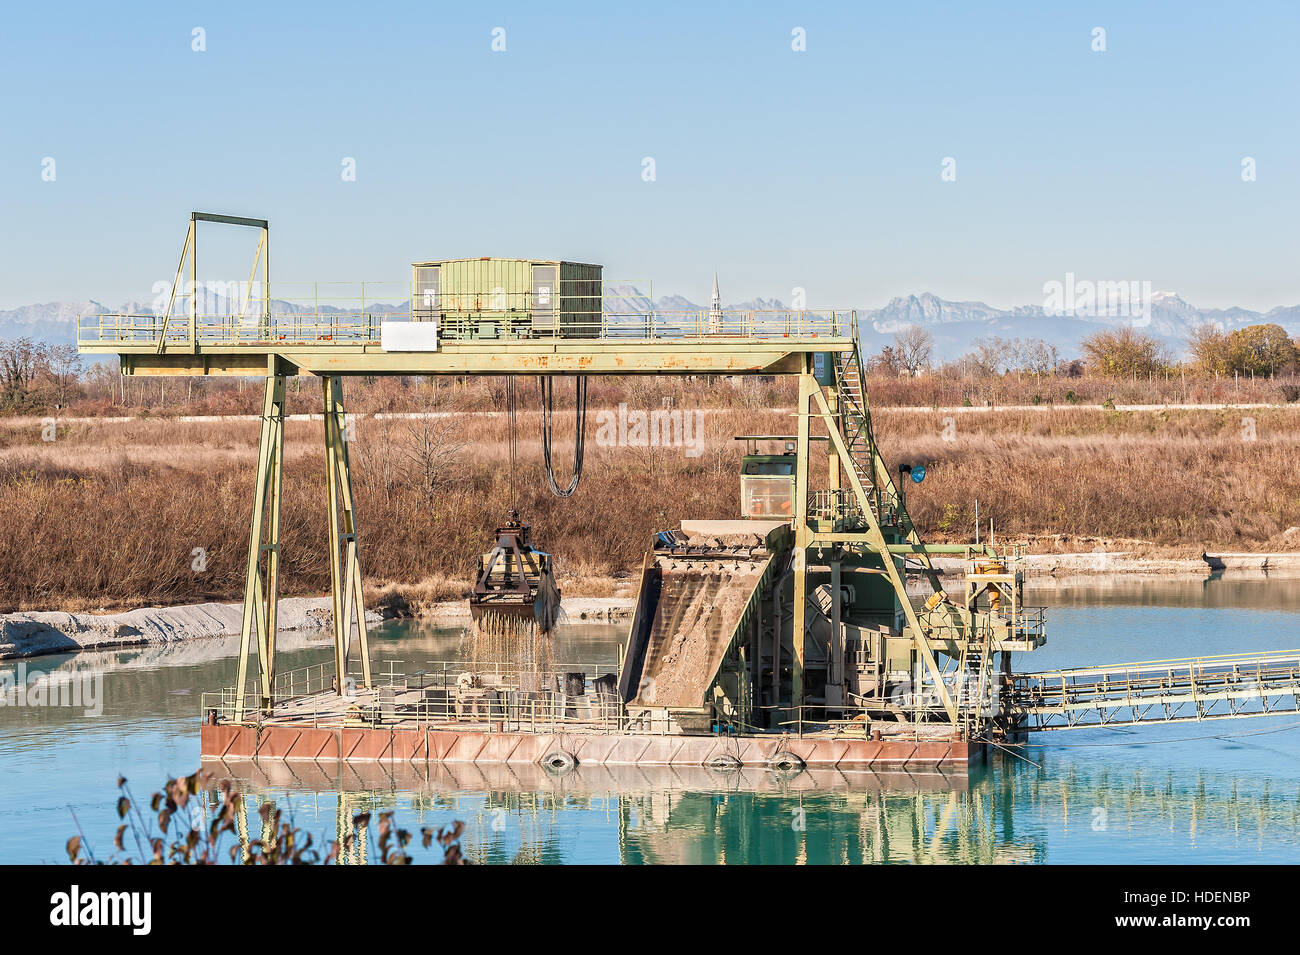 Gravel pit. Technology for extraction of gravel from a quarry filled with water. Stock Photo